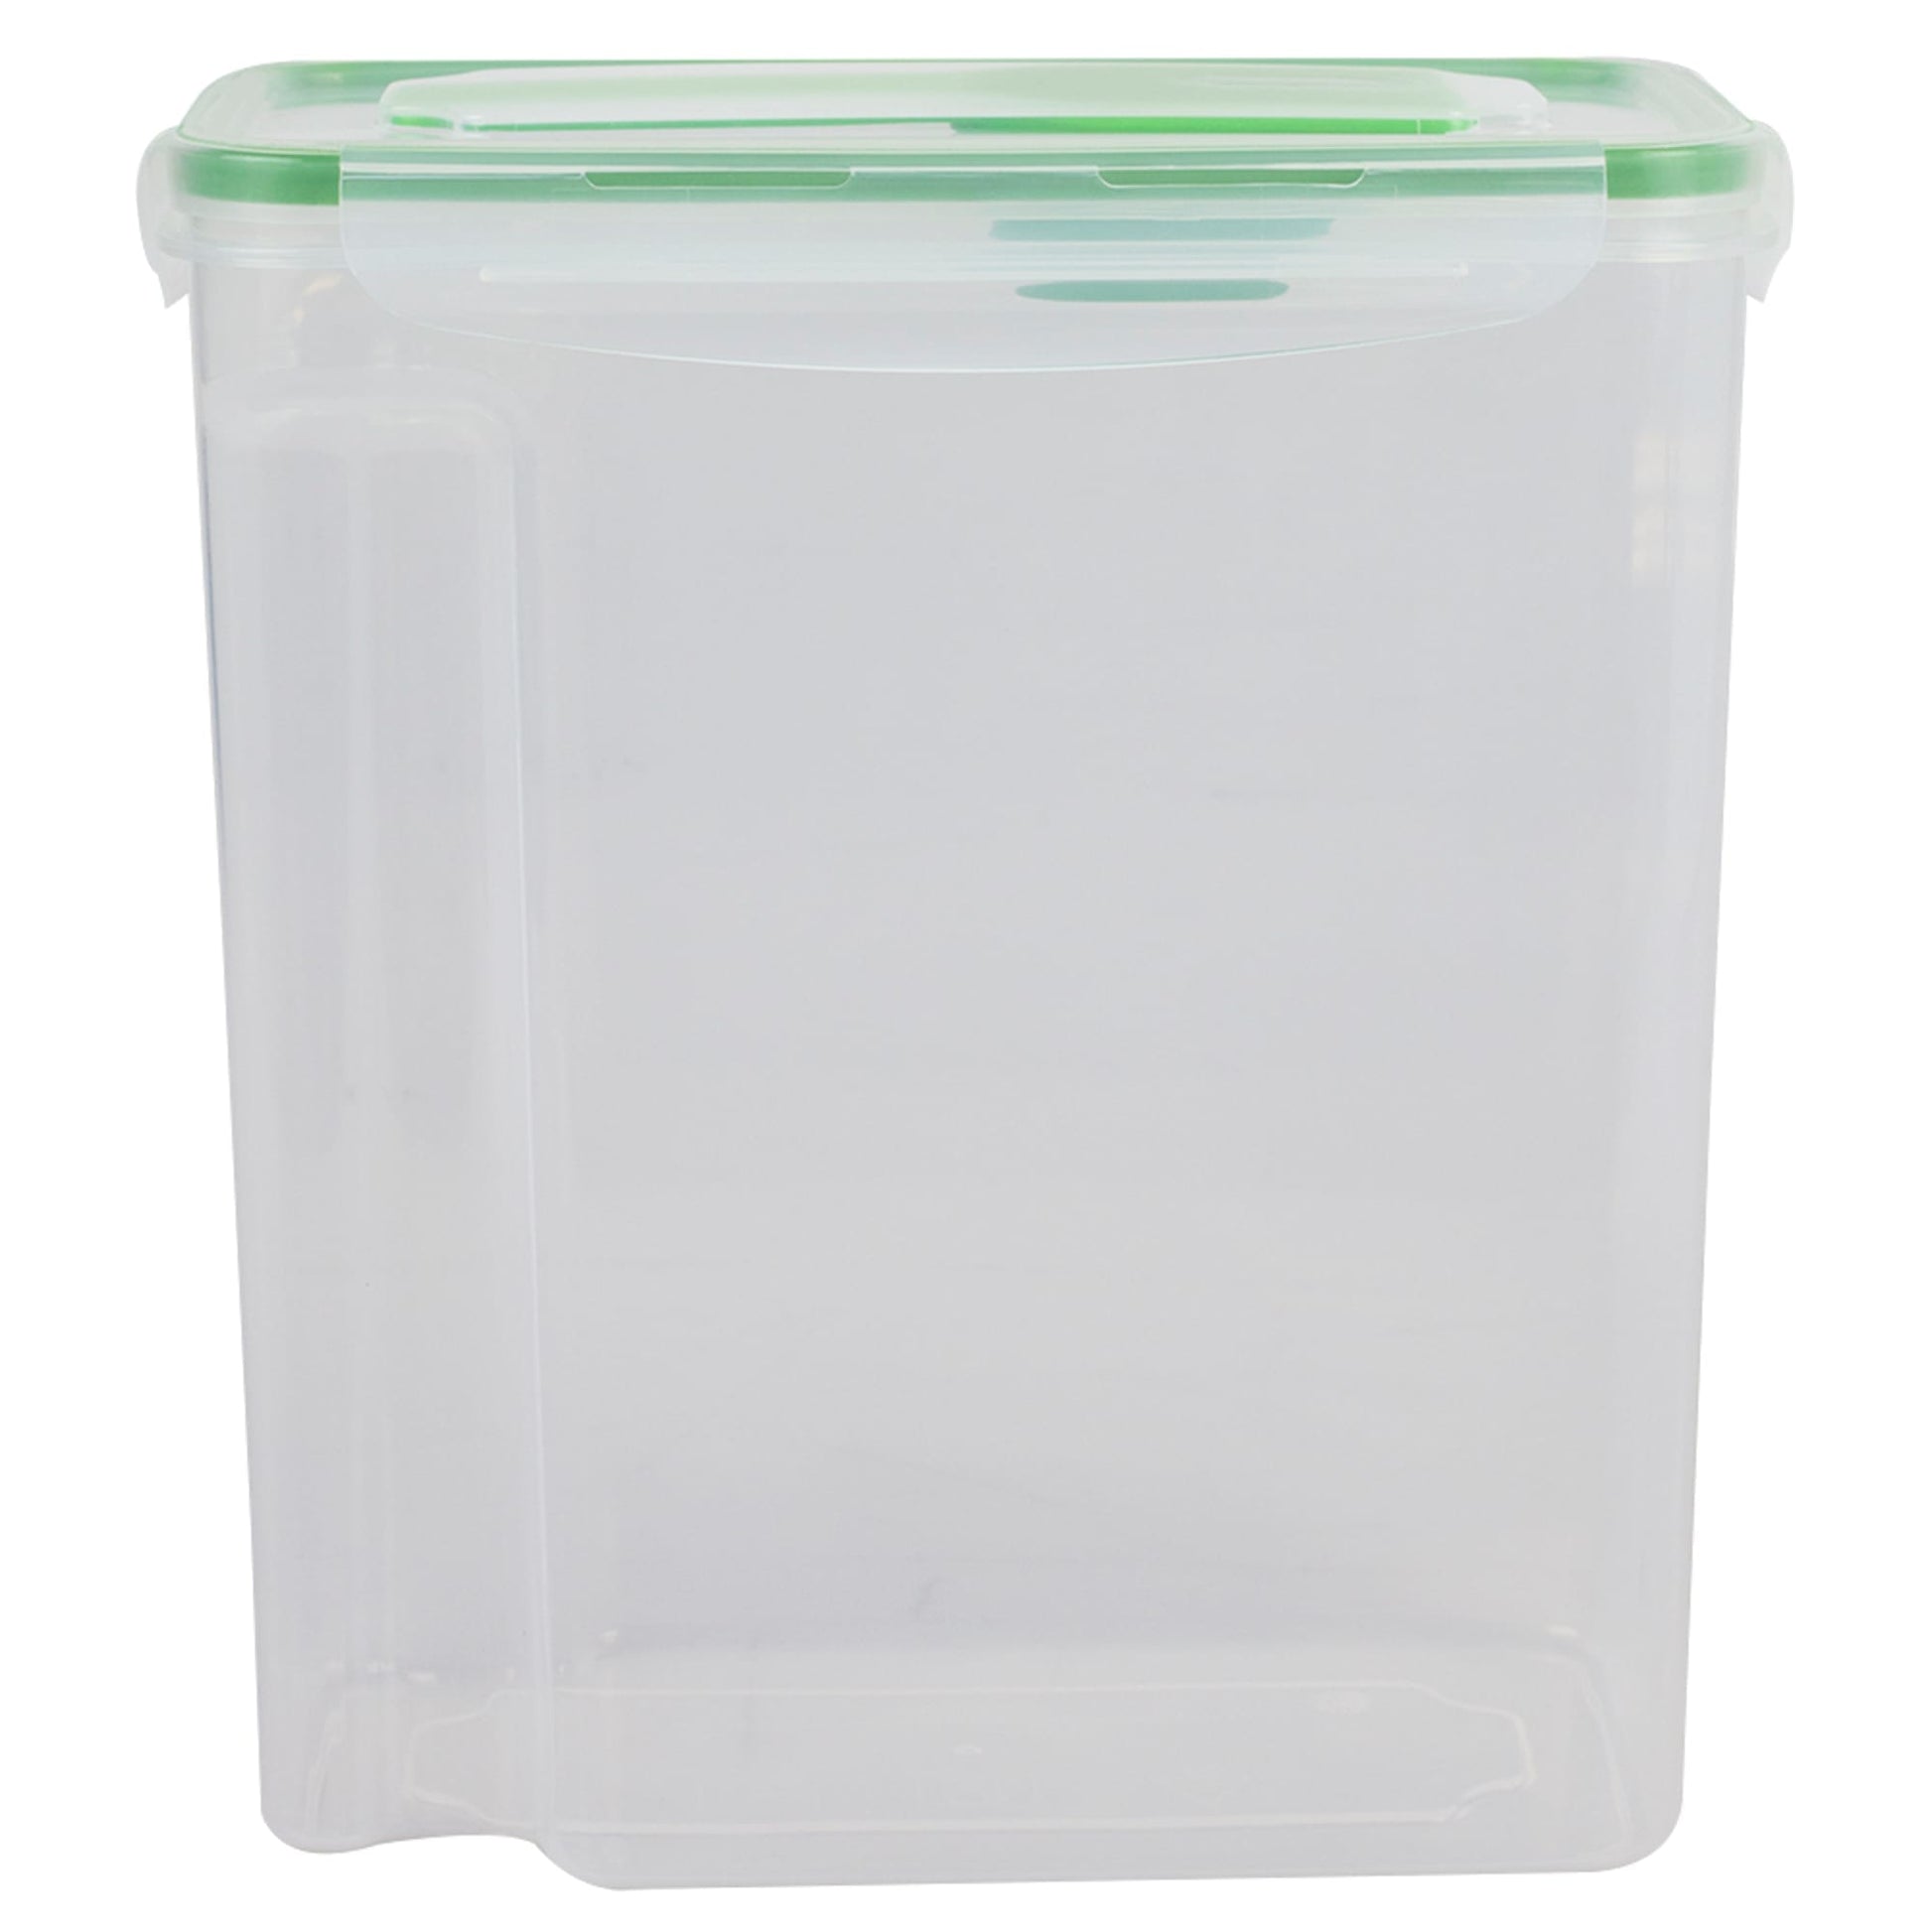 Basics 10-Piece Square Airtight Food Storage Containers for Kitchen  Pantry Organization, BPA Free Plastic, Clear